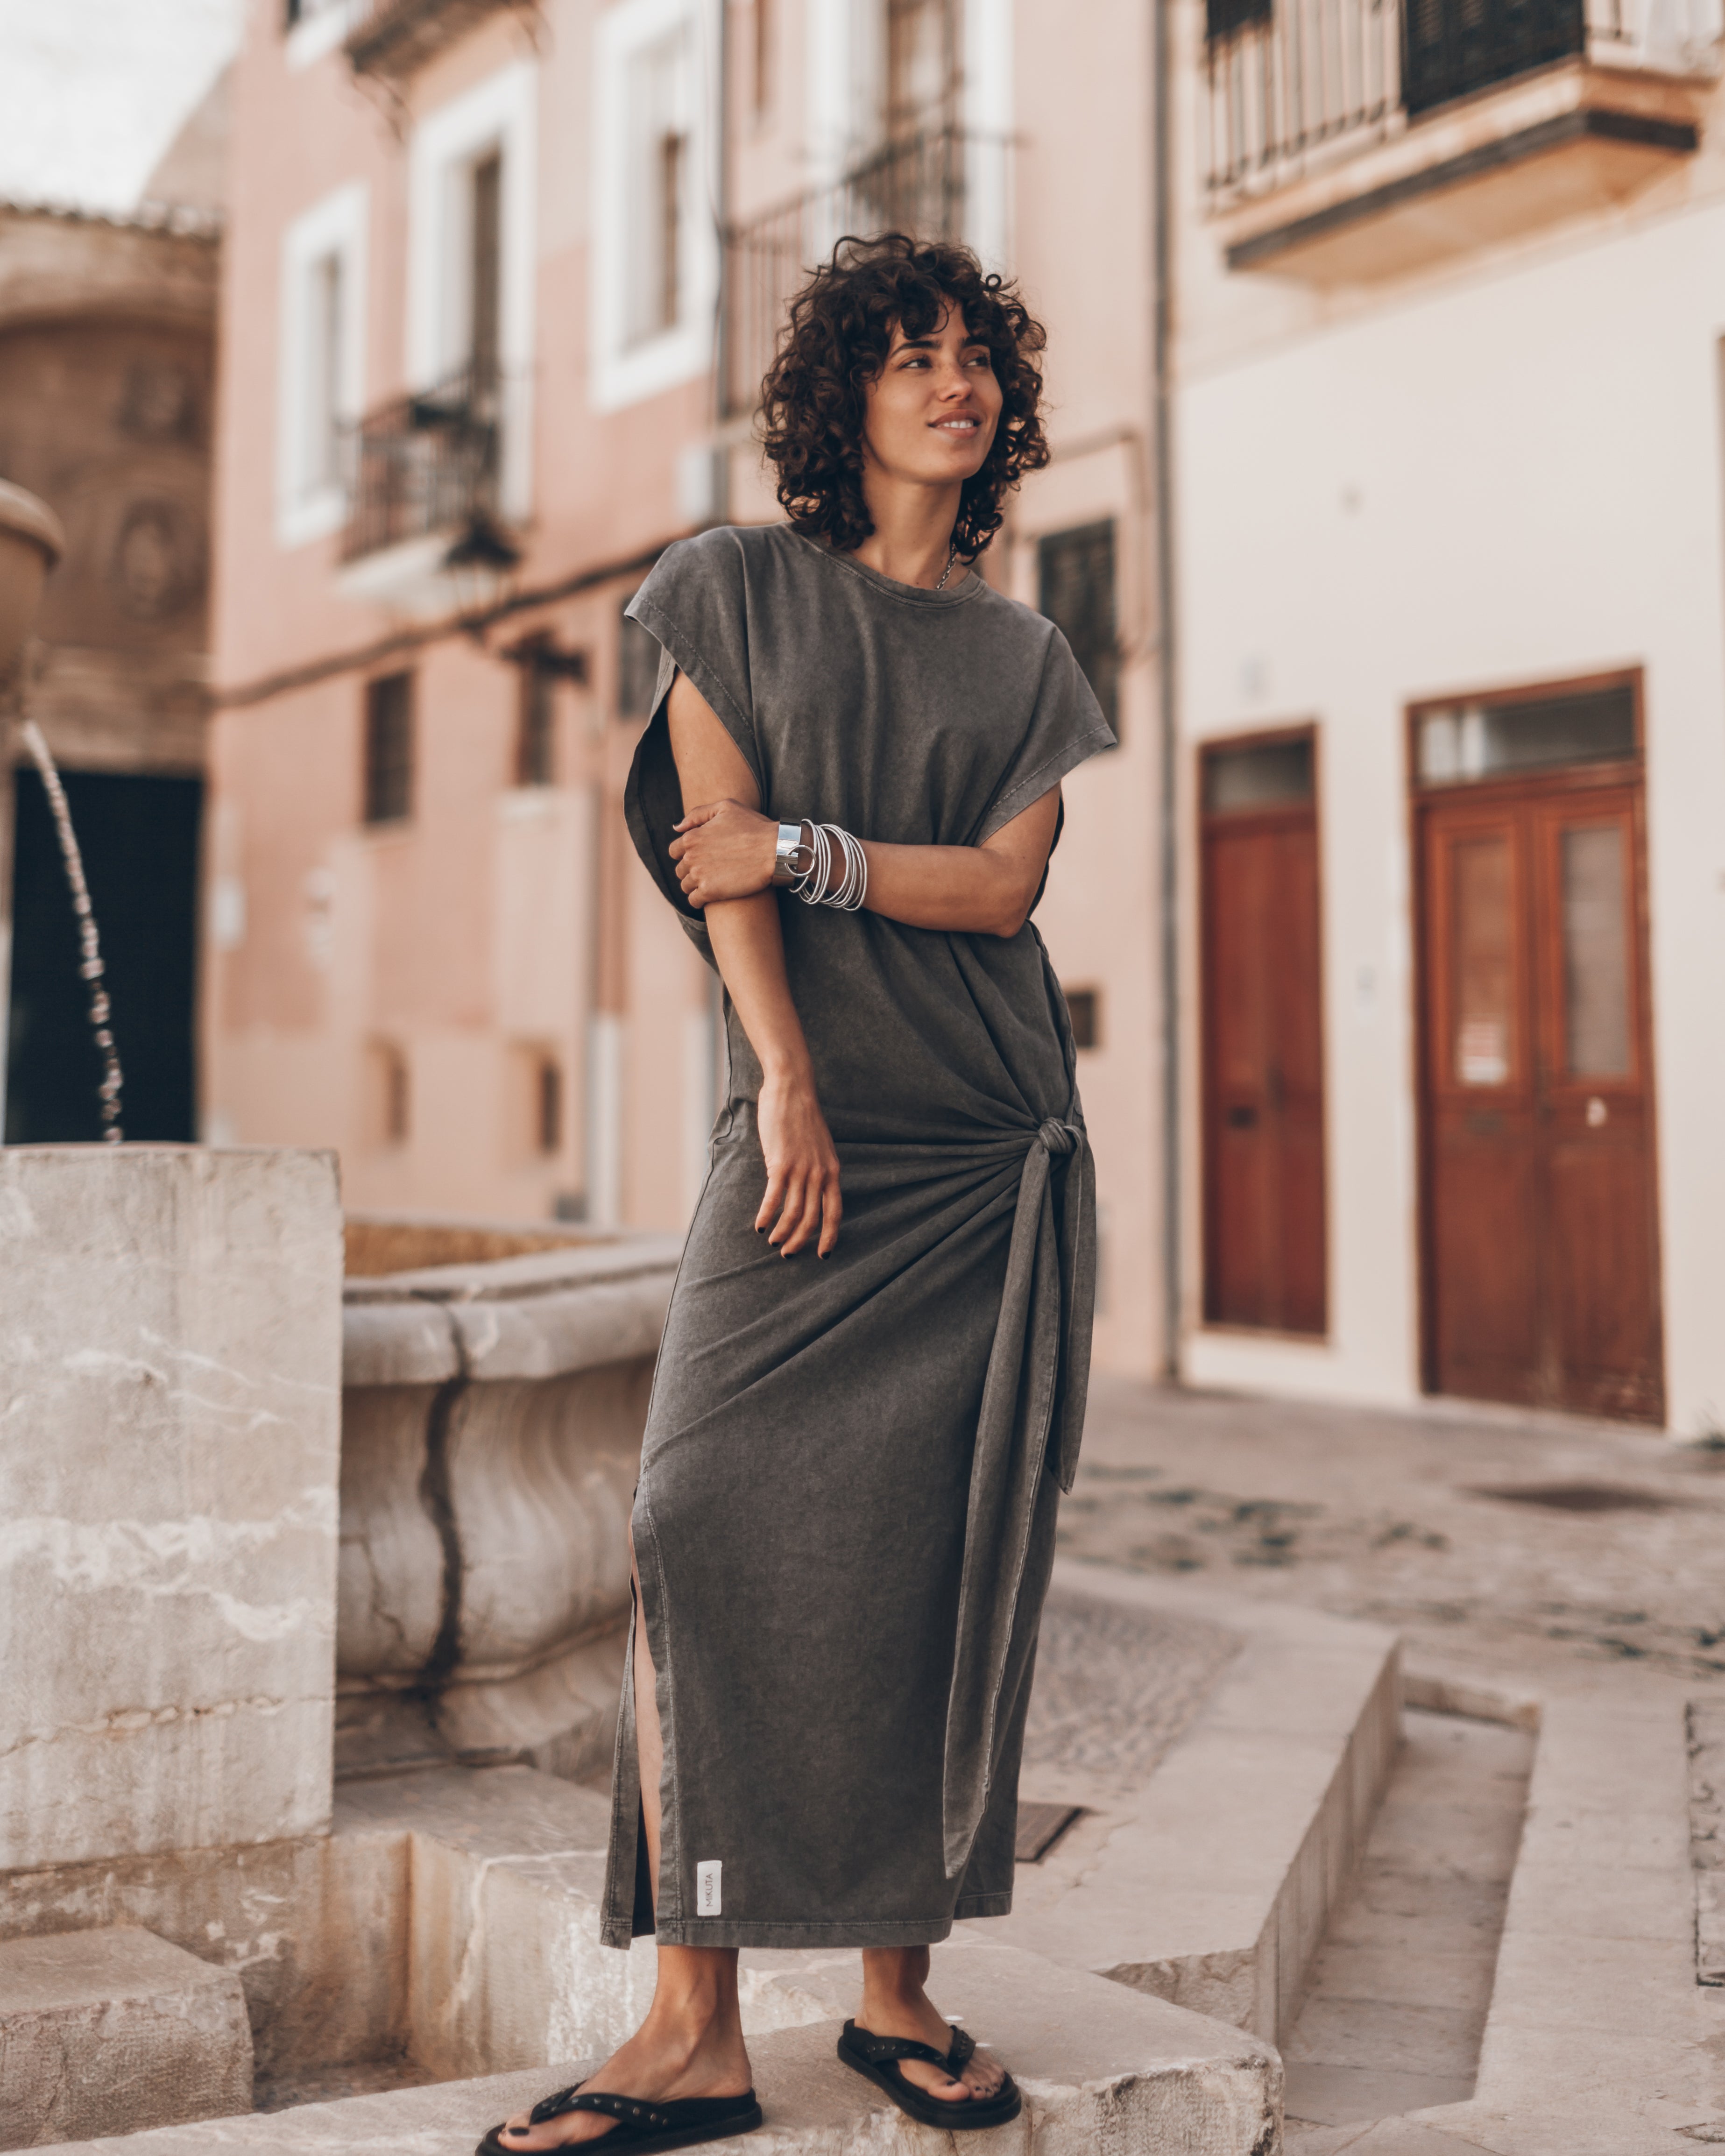 The Dark Faded Knotted Long Batwing Dress